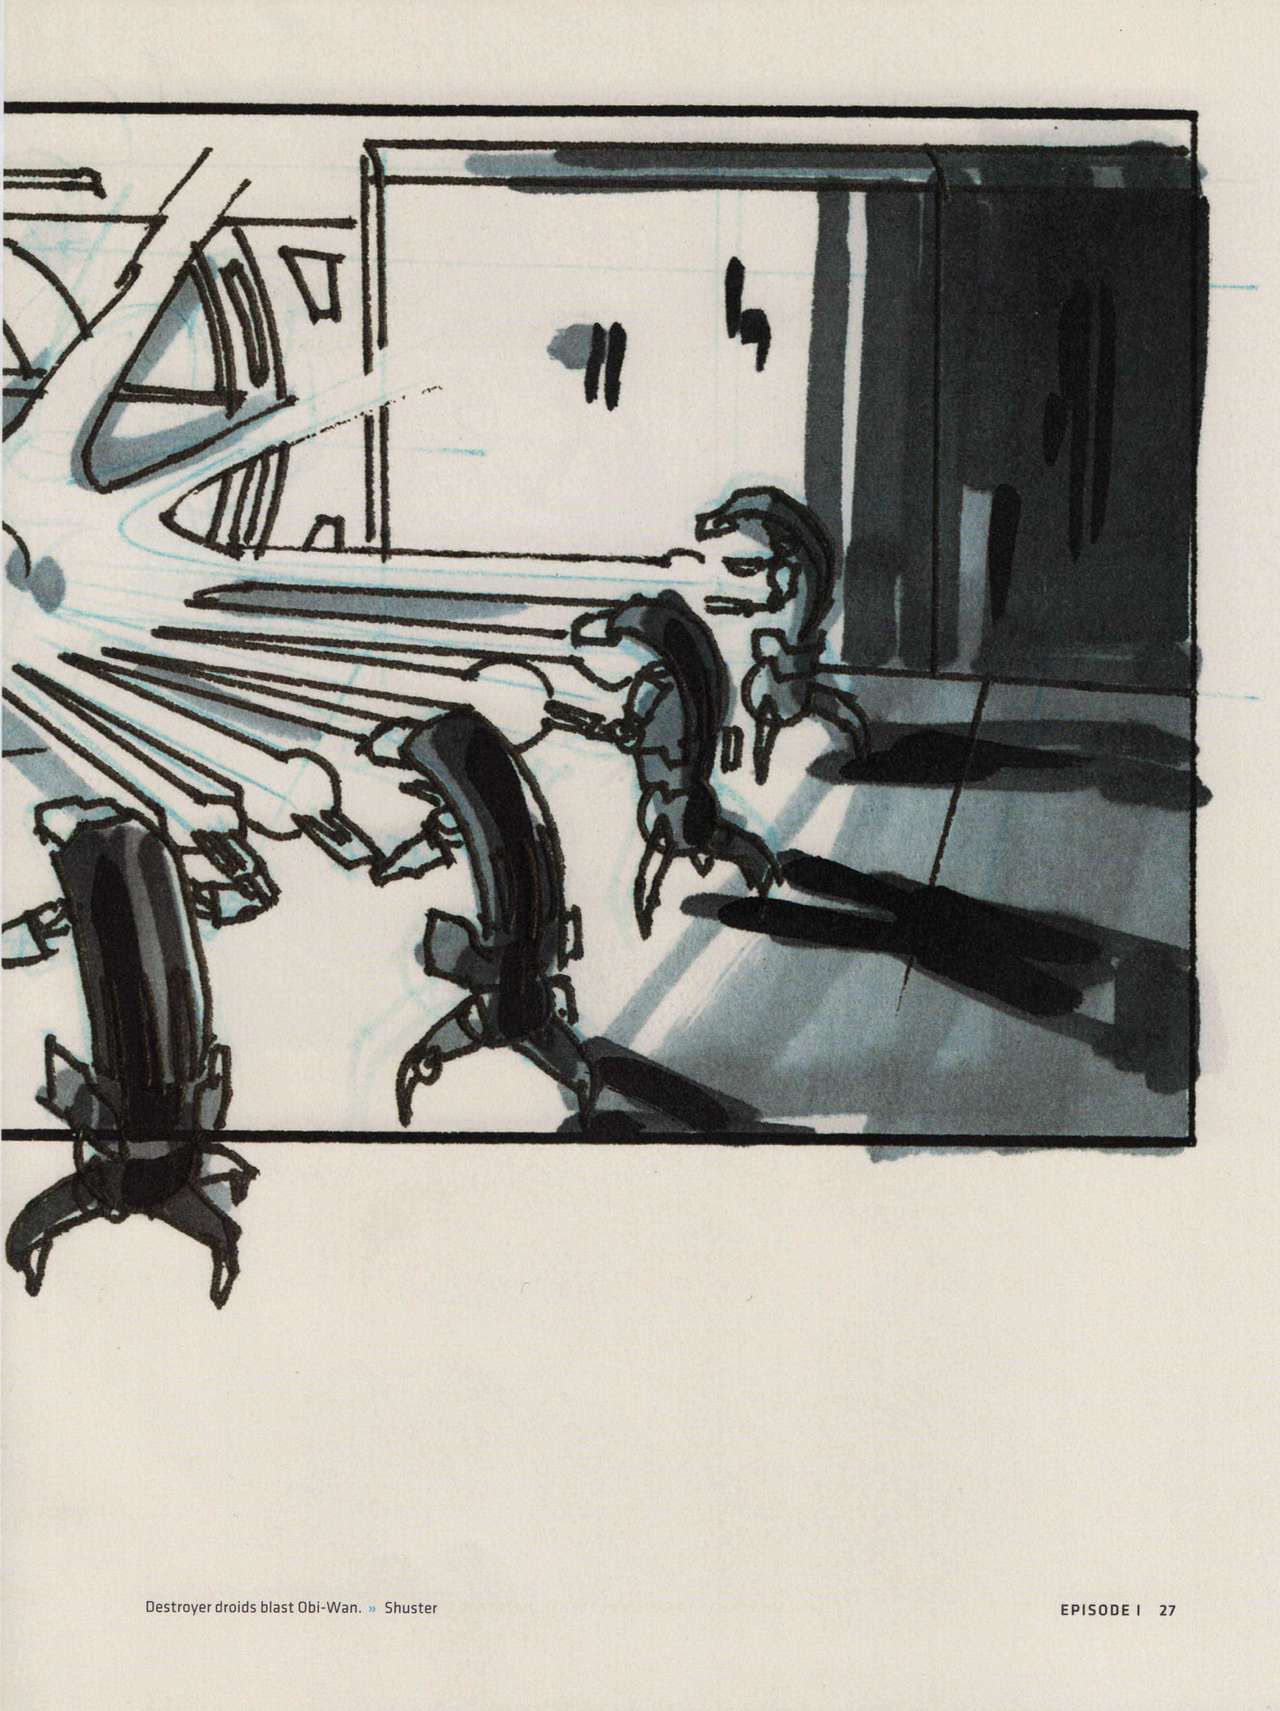 Star Wars Storyboards - The Prequel Trilogy 31